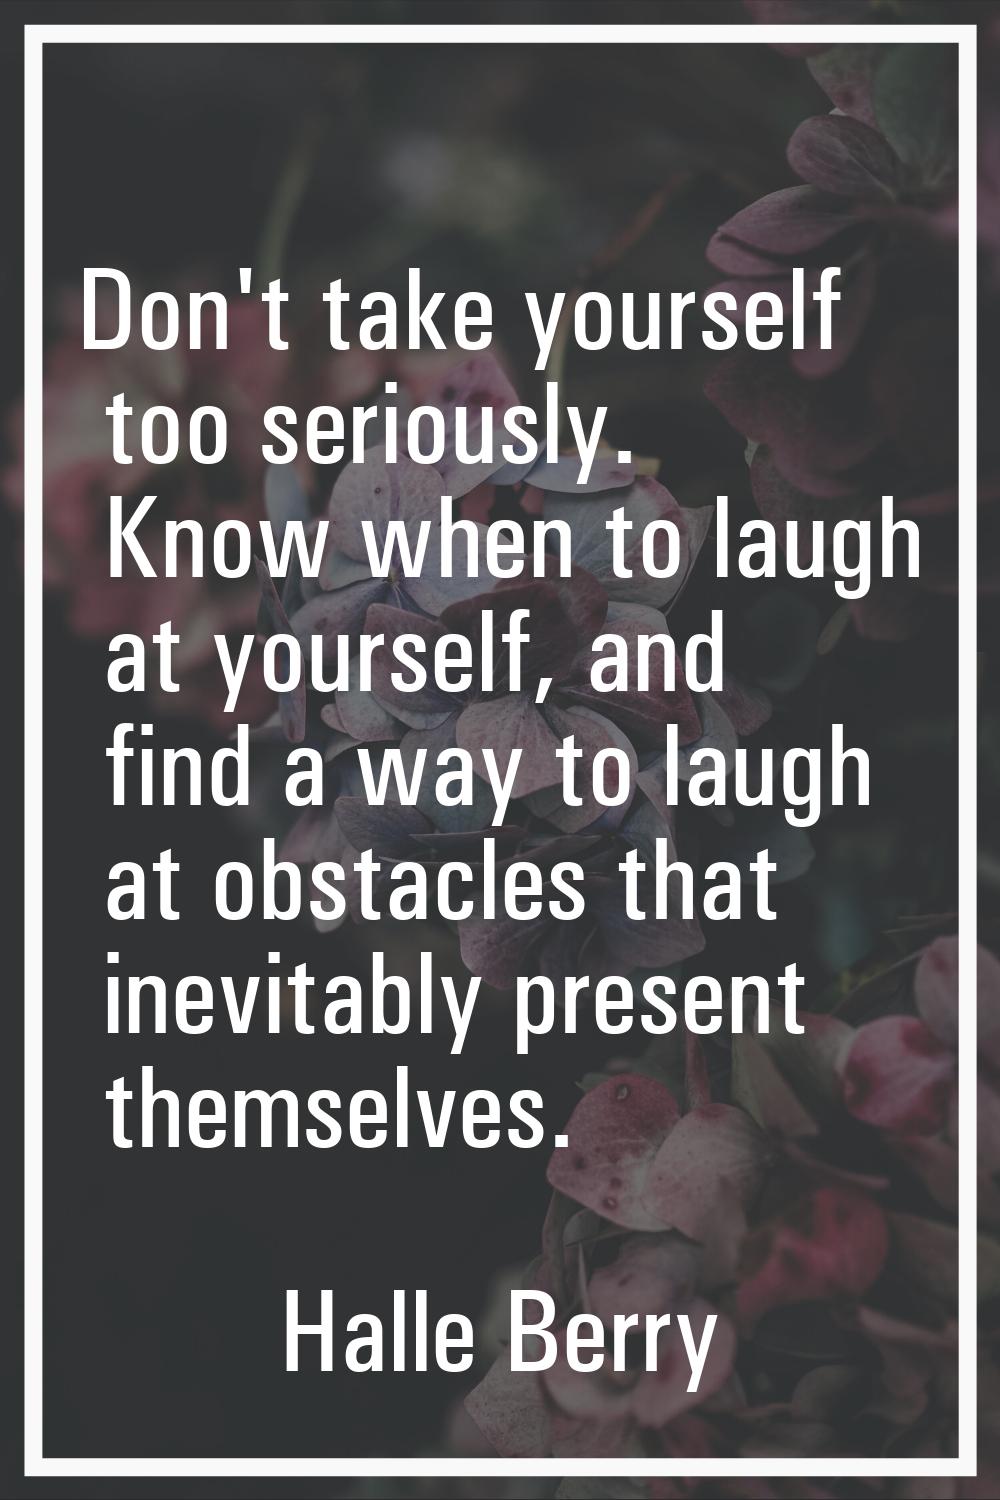 Don't take yourself too seriously. Know when to laugh at yourself, and find a way to laugh at obsta